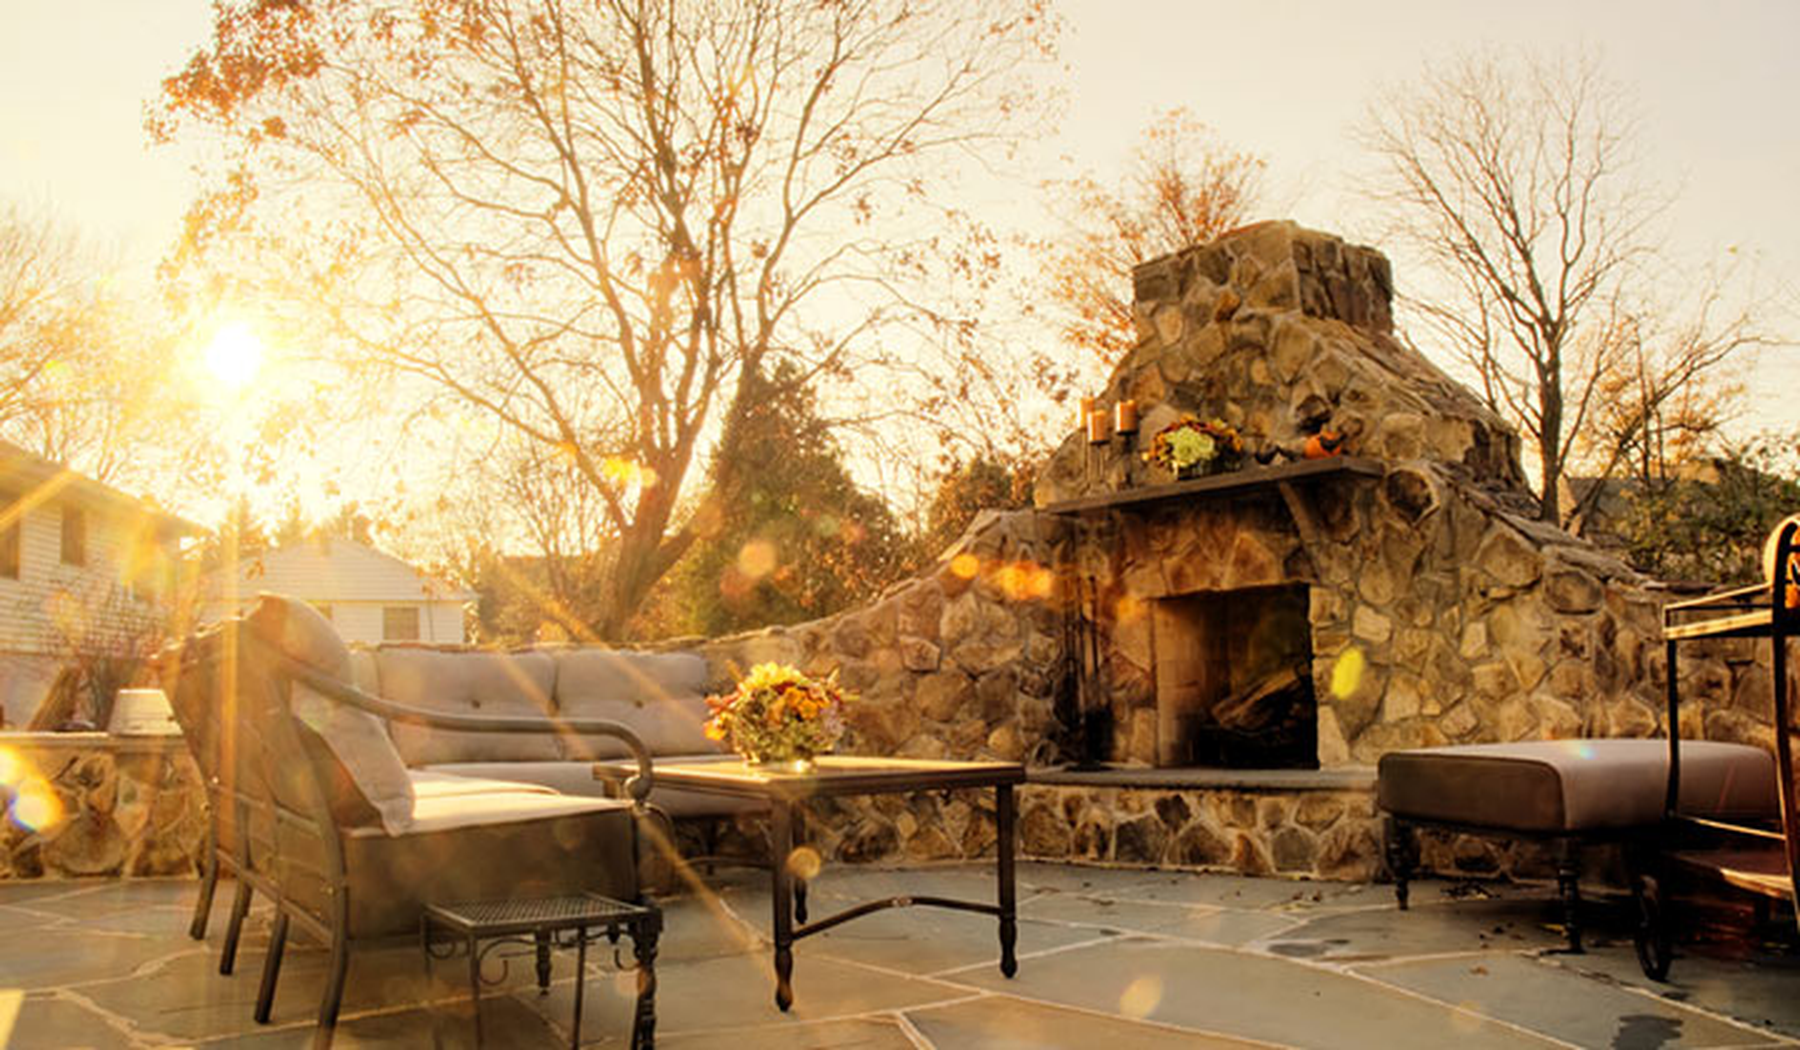 Fall afternoon lighting an outdoor fireplace and patio